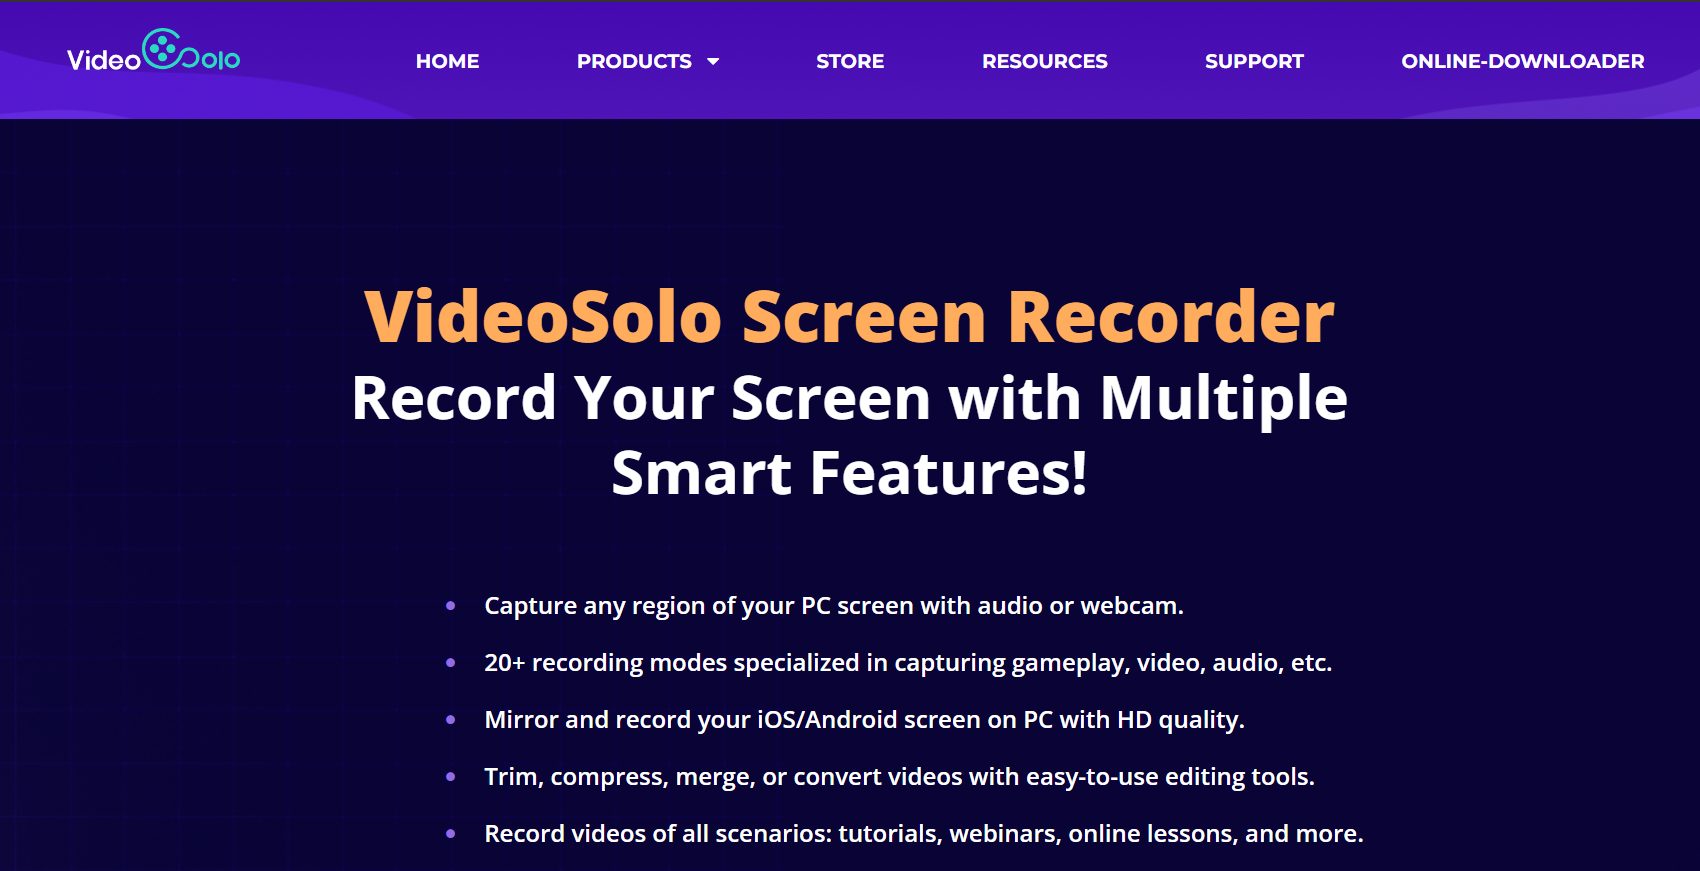 VideoSolo Screen Recorder Review : How to Record Your Screen